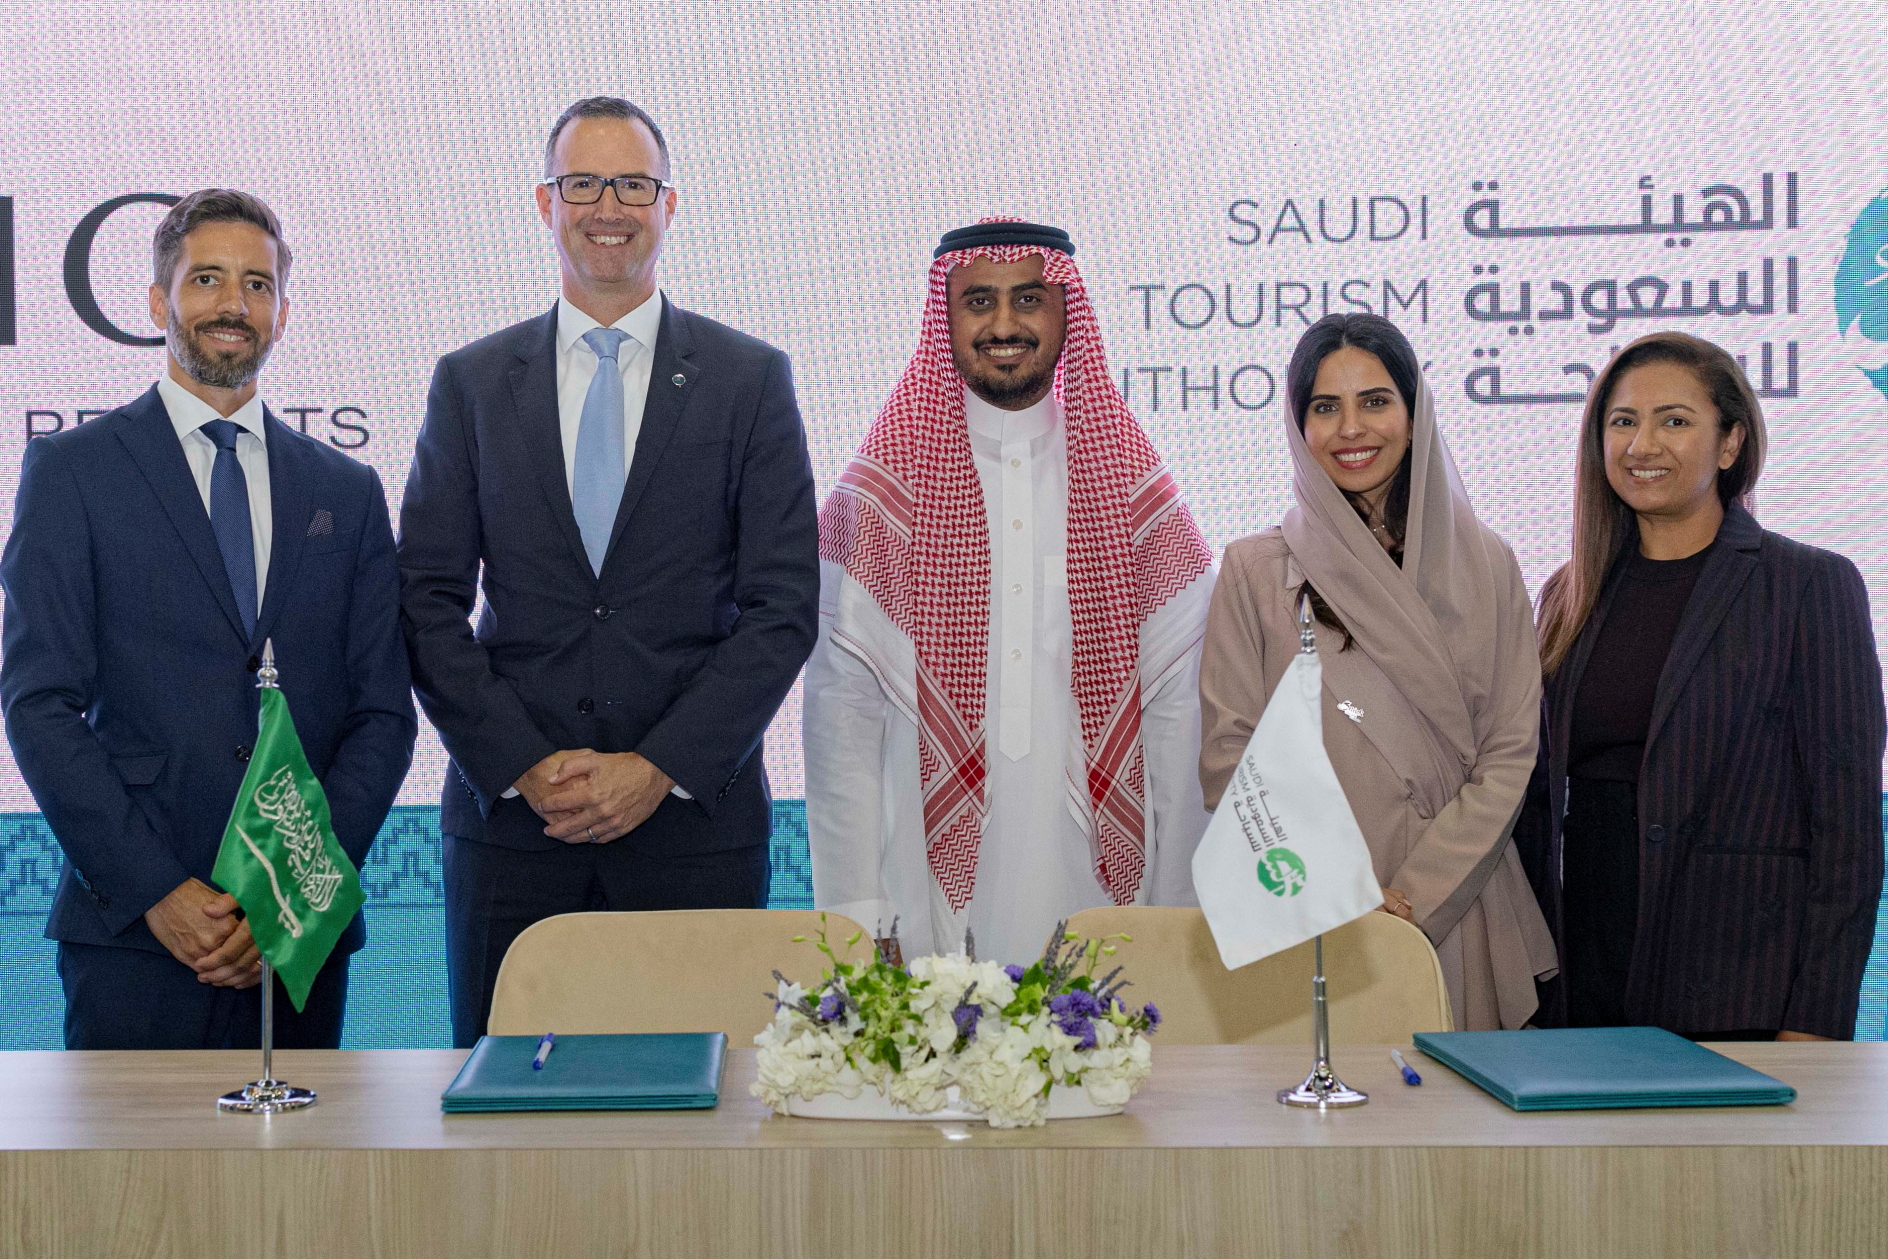 IHG signs MOU with the Saudi Tourism Authority. Click to enlarge.